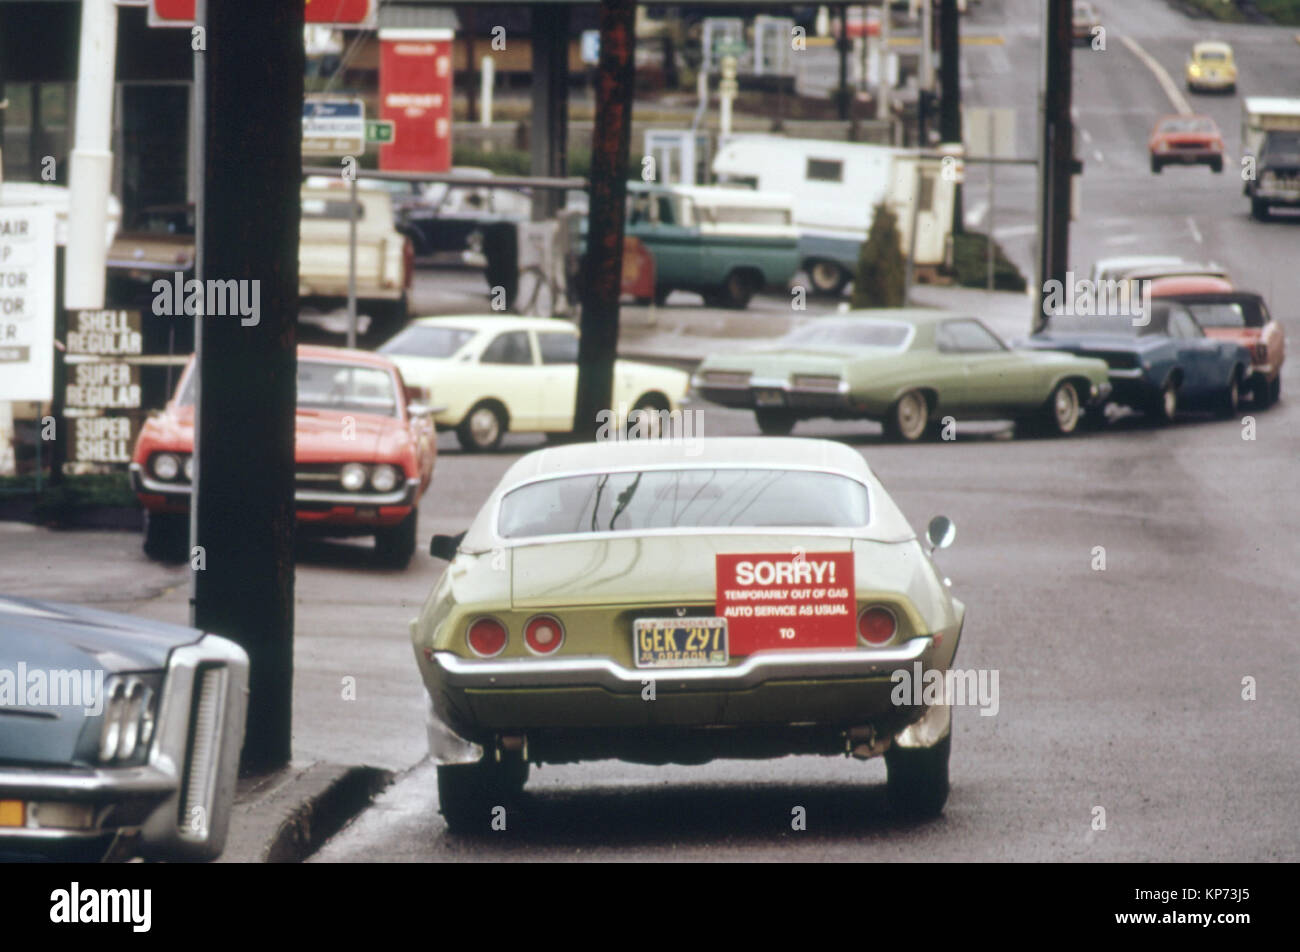 After Hours in a Gasoline Line a Driver Could Arrive at the Pumps and Find Out That the Car Ahead of Him Was the Last to Get Fuel. So Many Stations, Such as This One in Portland, Began Using a 'Sorry' Sign on the Last Car to Get Gas 12/1973 Stock Photo